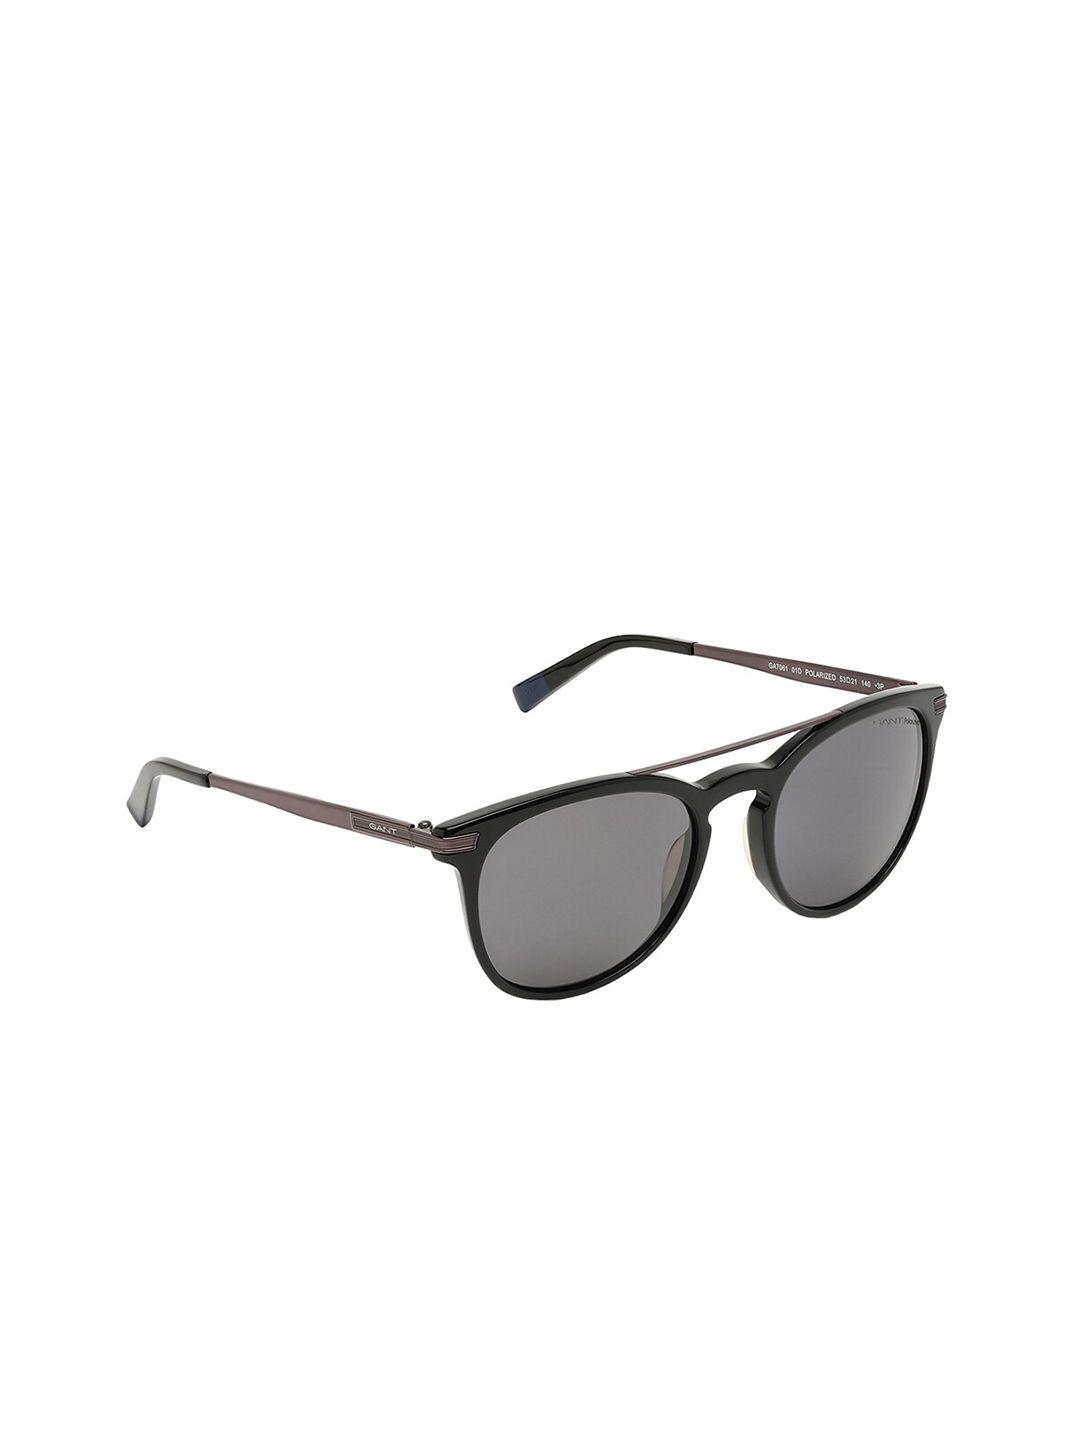 gant men browline sunglasses with uv protected lens